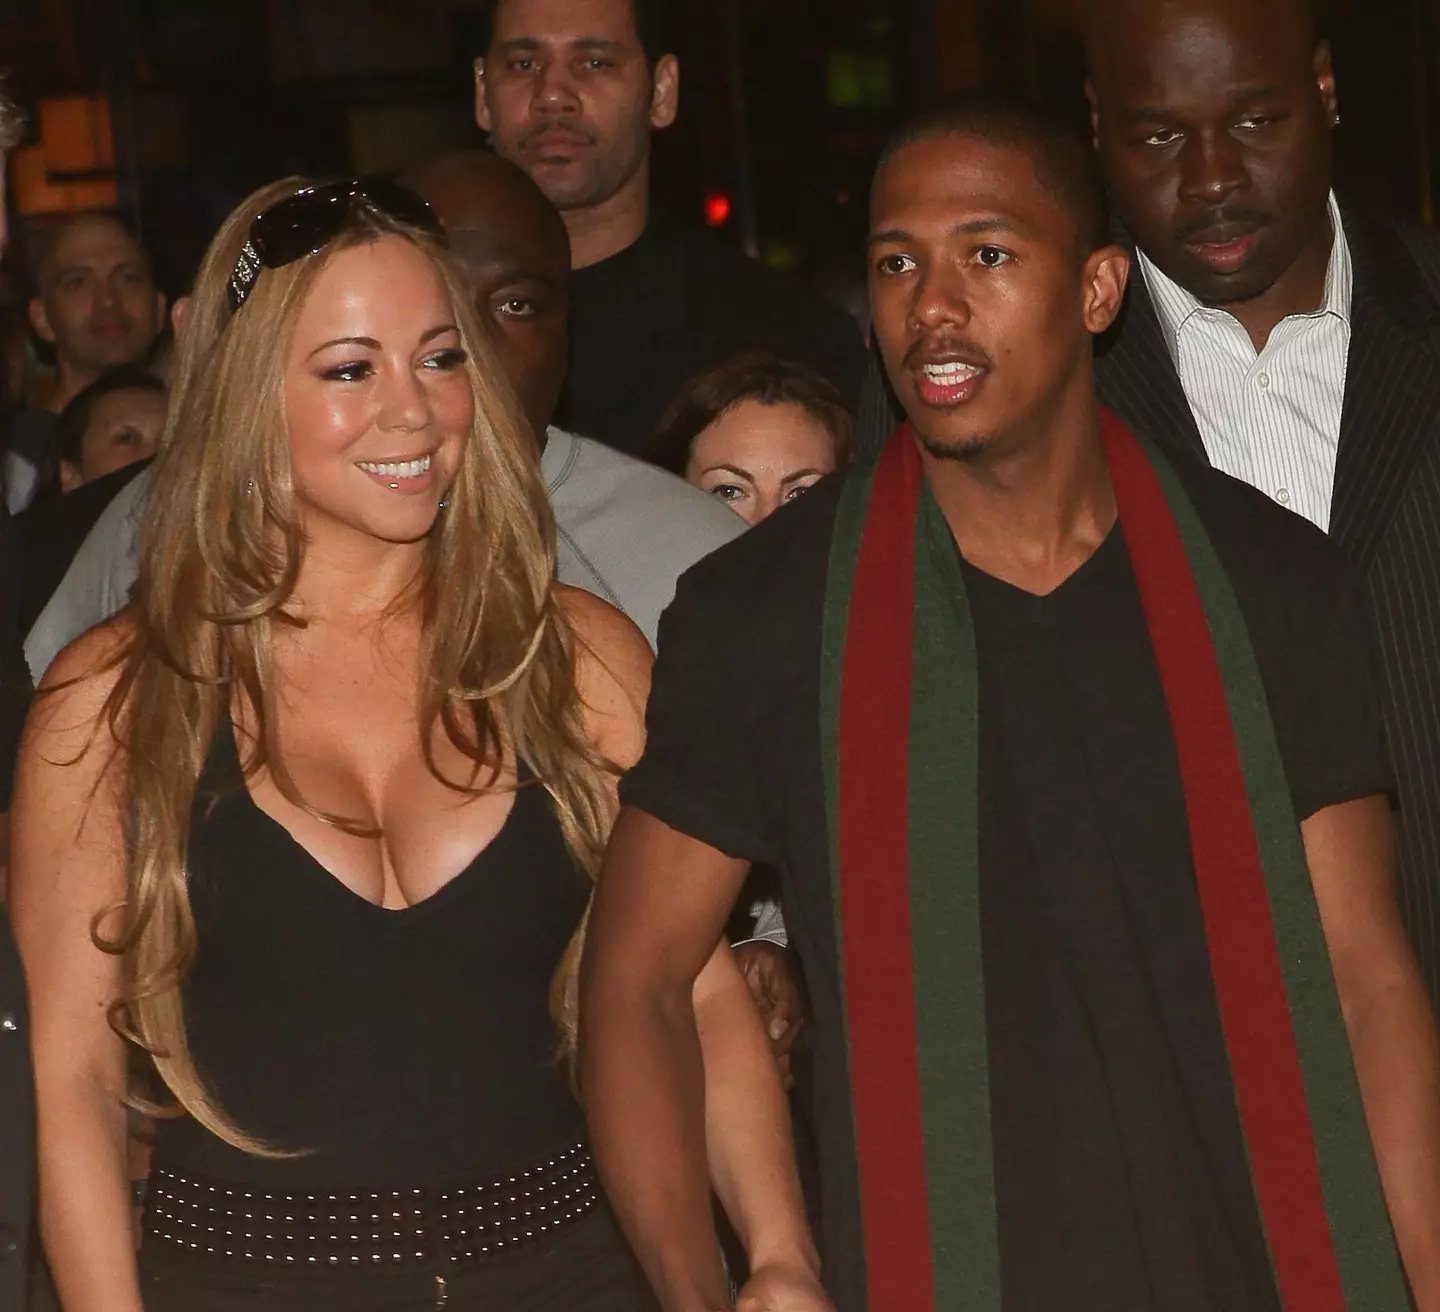 Nick Cannon's first children were twins with Mariah Carey, now he's set to welcome his 12th into the world.